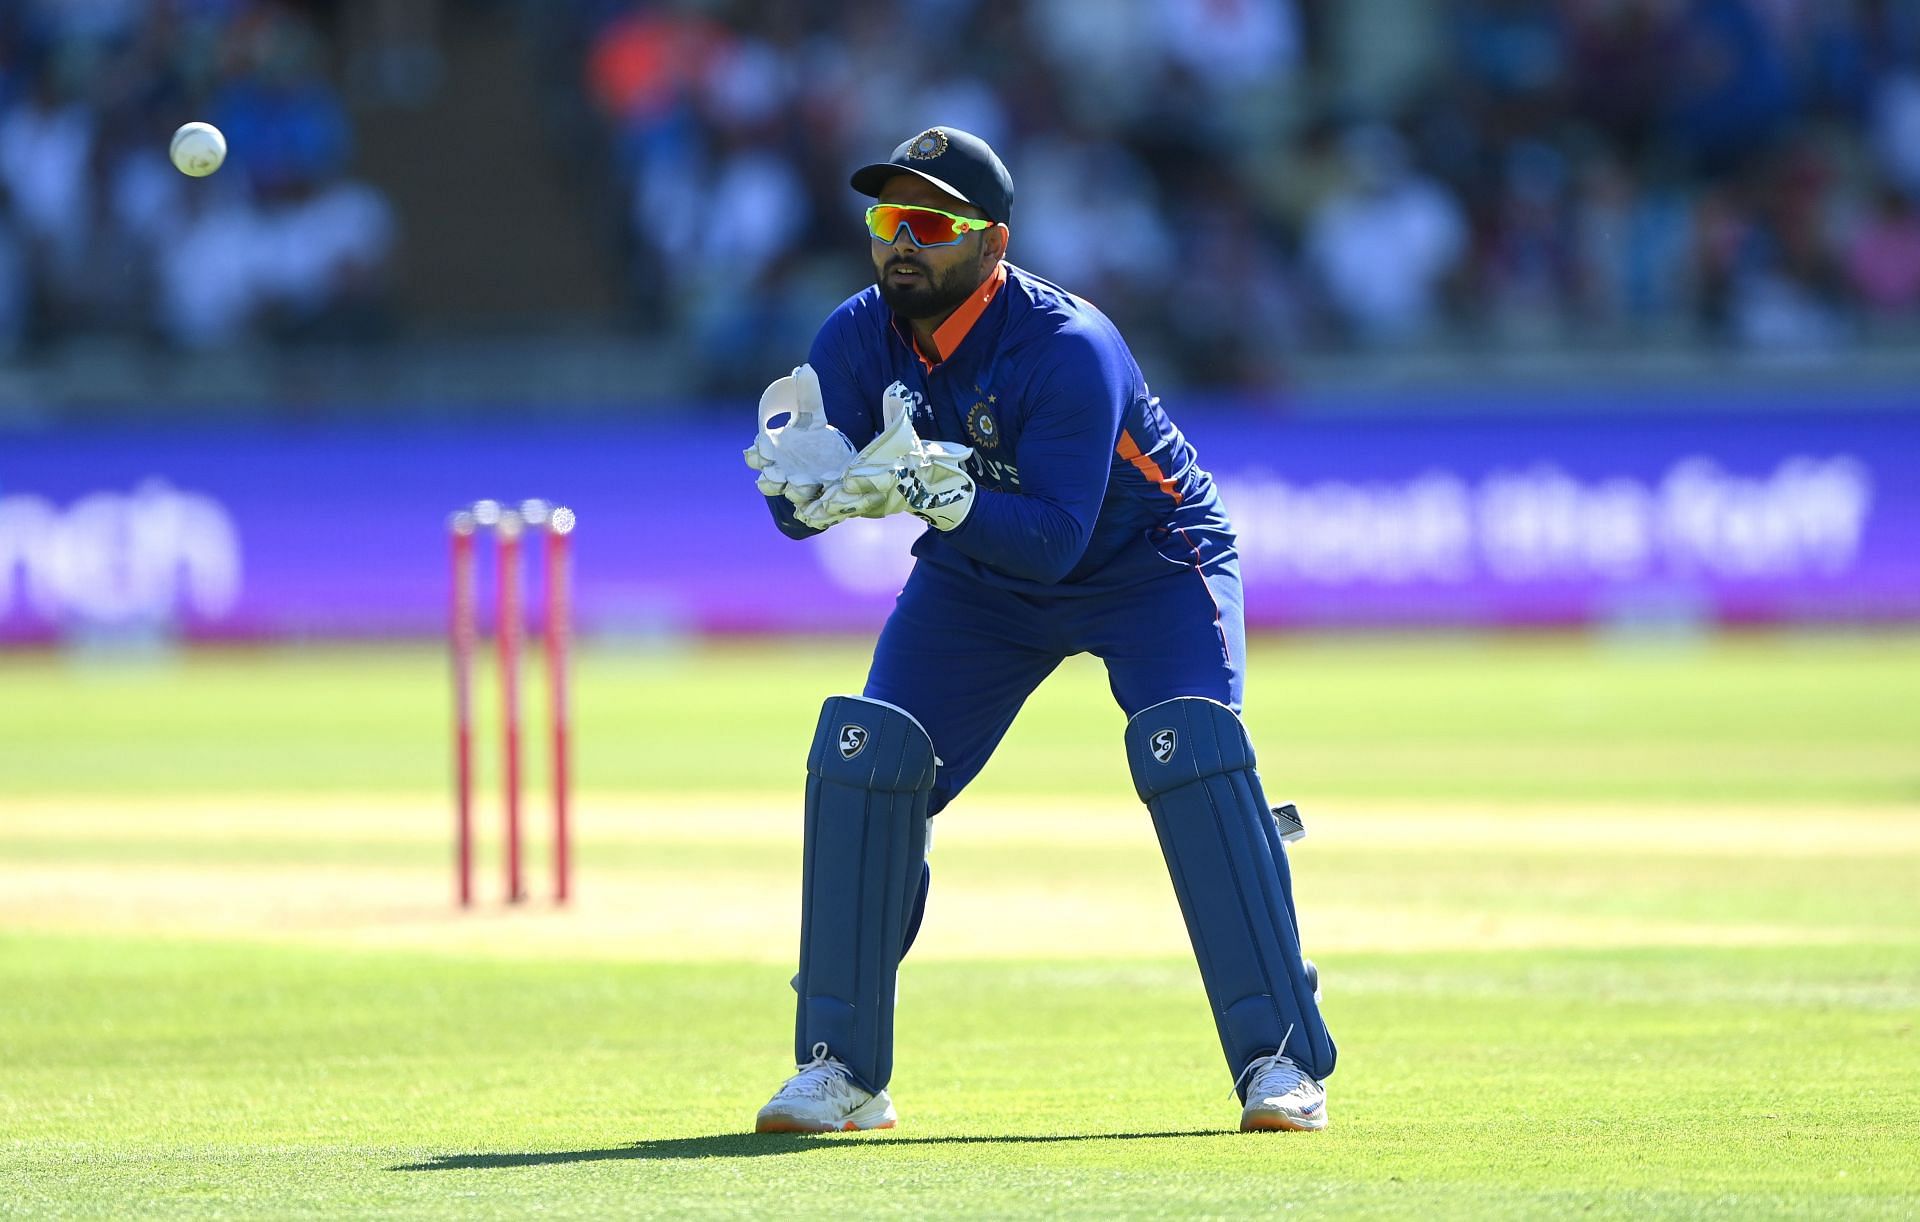 Rishabh Pant has improved a lot as a wicket-keeper